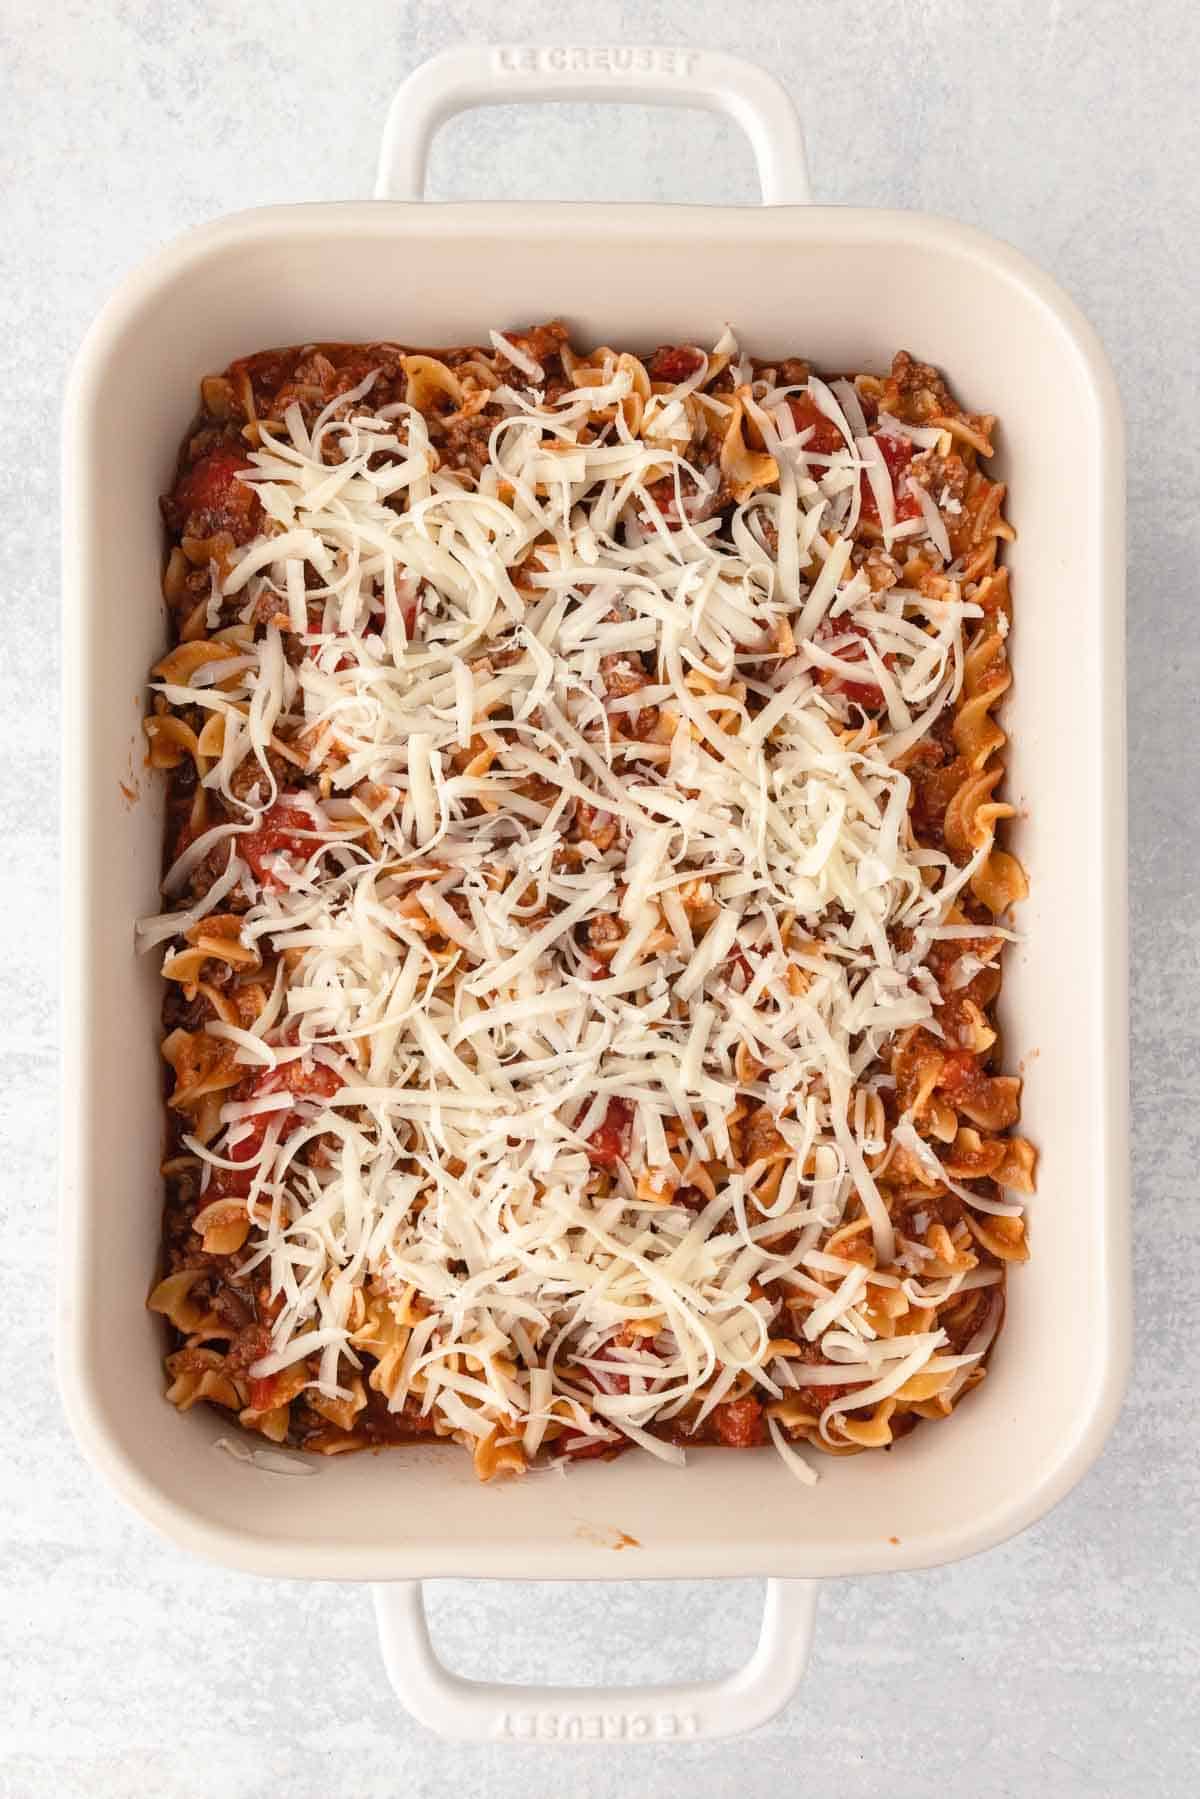 Beef and noodle mixture is spread into a prepared casserole dish and topped with an even layer of mozzarella shreds.